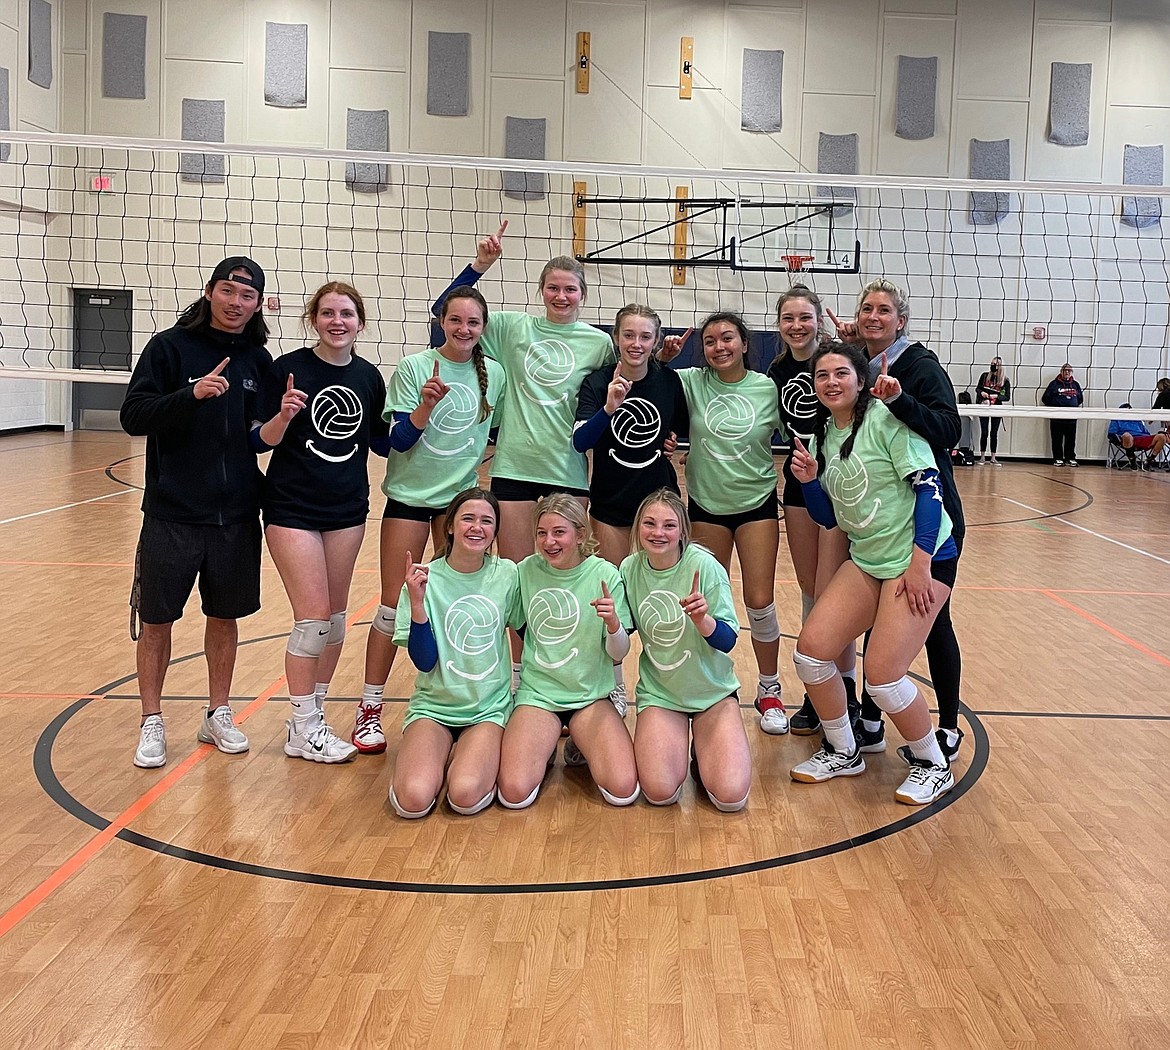 Courtesy photo
On April 3, the 208 U14 Green team won the Fools Fest tournament at the Boys and Girls Club in Coeur D Alene. This was a U14-U16 tournament.
In the front row from left are Vanessa Kison, Addy Hocking and Isabelle Covey; and back row from left, coach Jack Judge, Emily Shafer, Paisley Goings, Sam Downey, Kyla Ross, Olivia Zazuetta, Kaydence Green, Kaela Gump and coach Jessica Trevena.